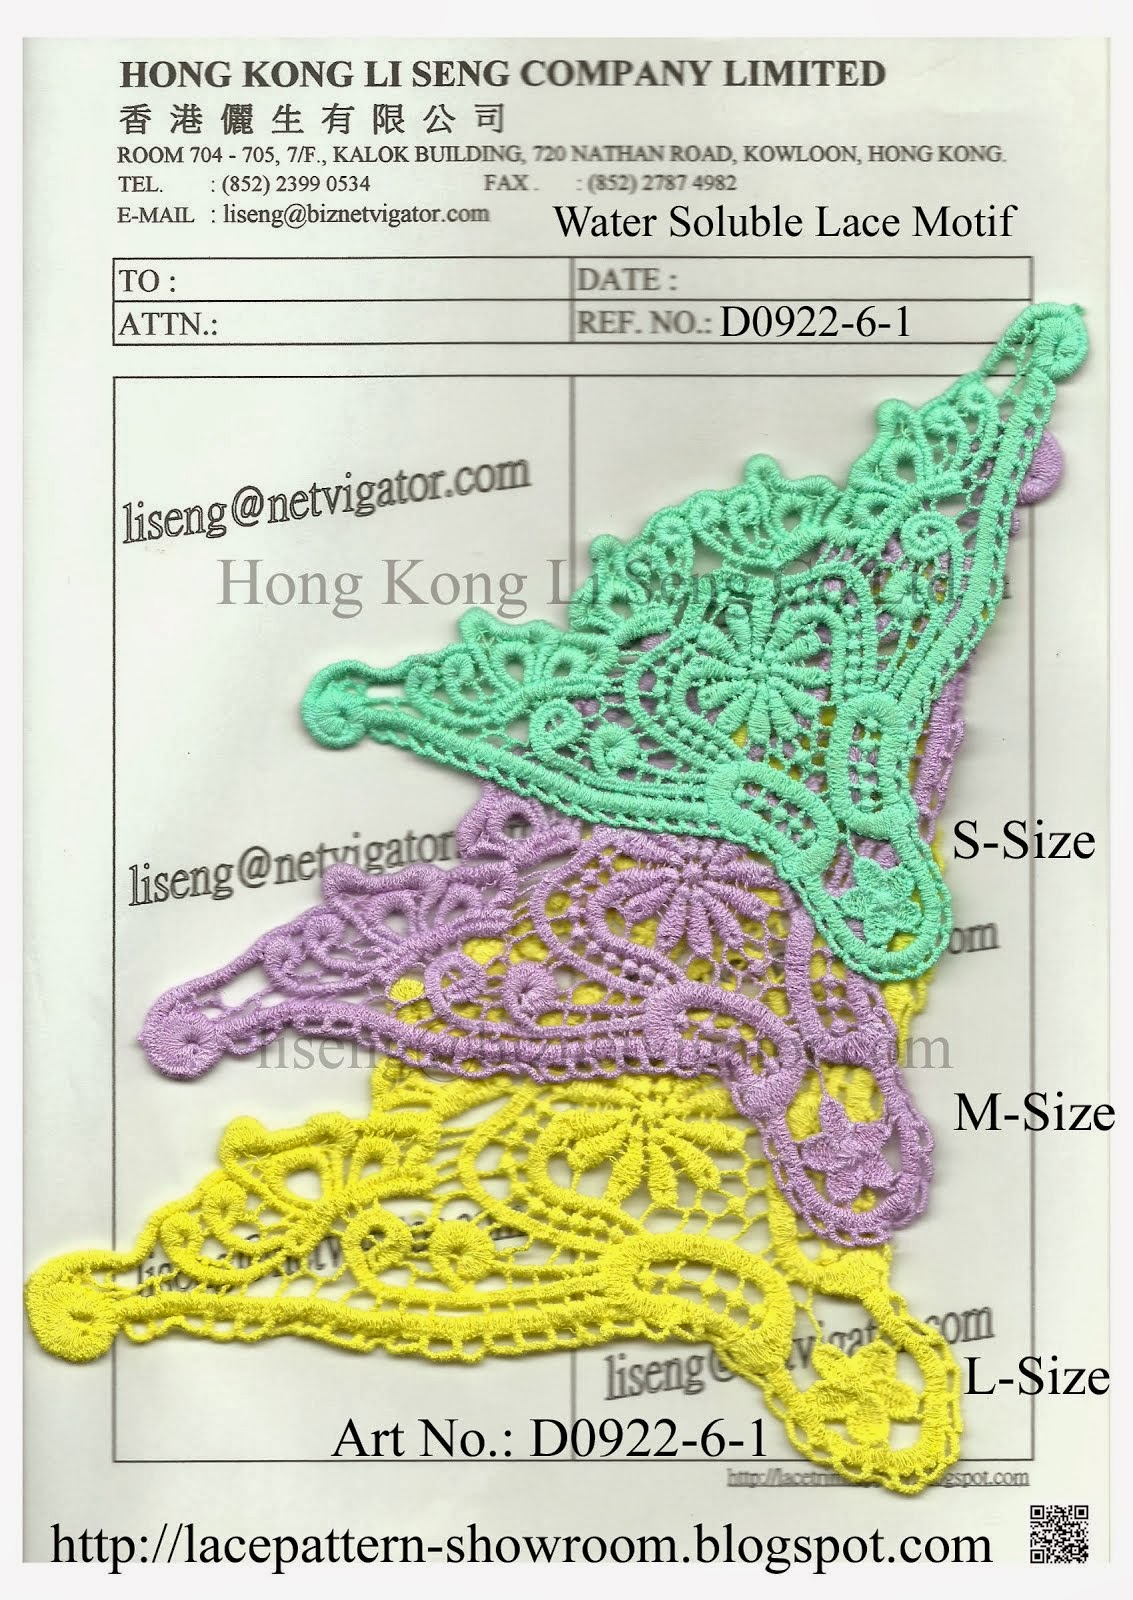 New Lace Pattern - Water Soluble Lace Motif Wholesale Supplier and Manufacturer